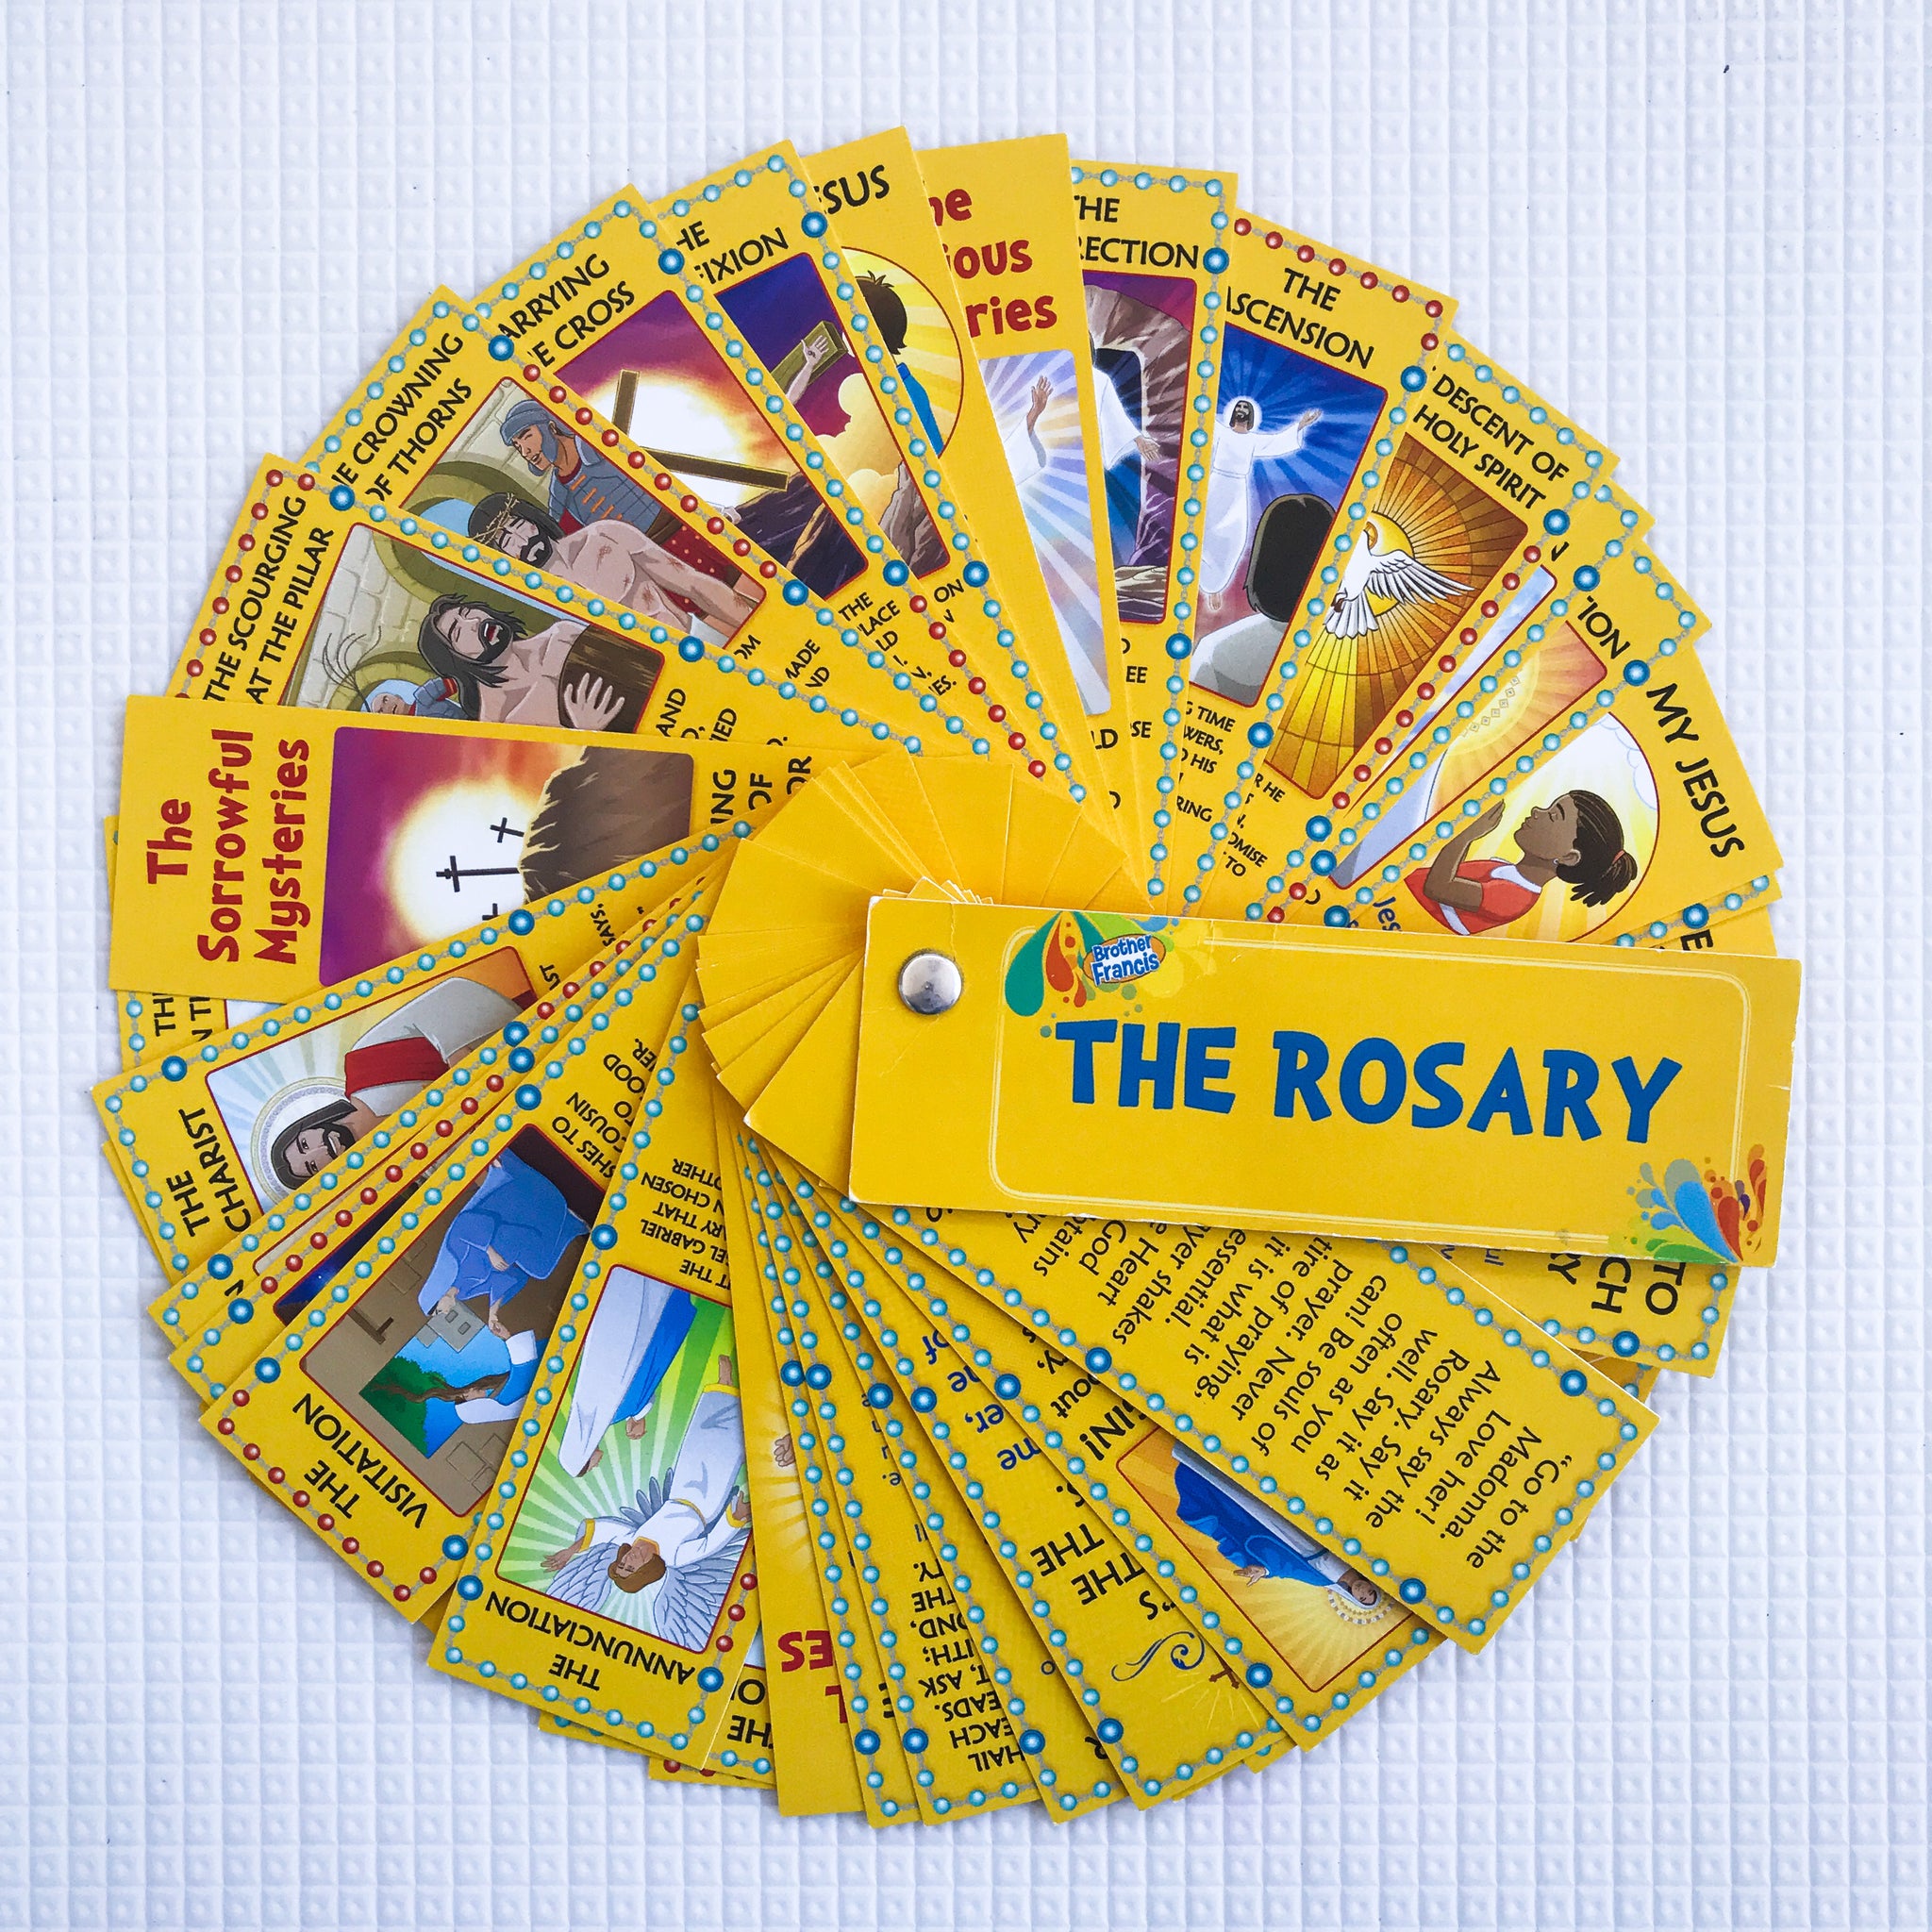 Brother Francis Devotional Fan - The Rosary